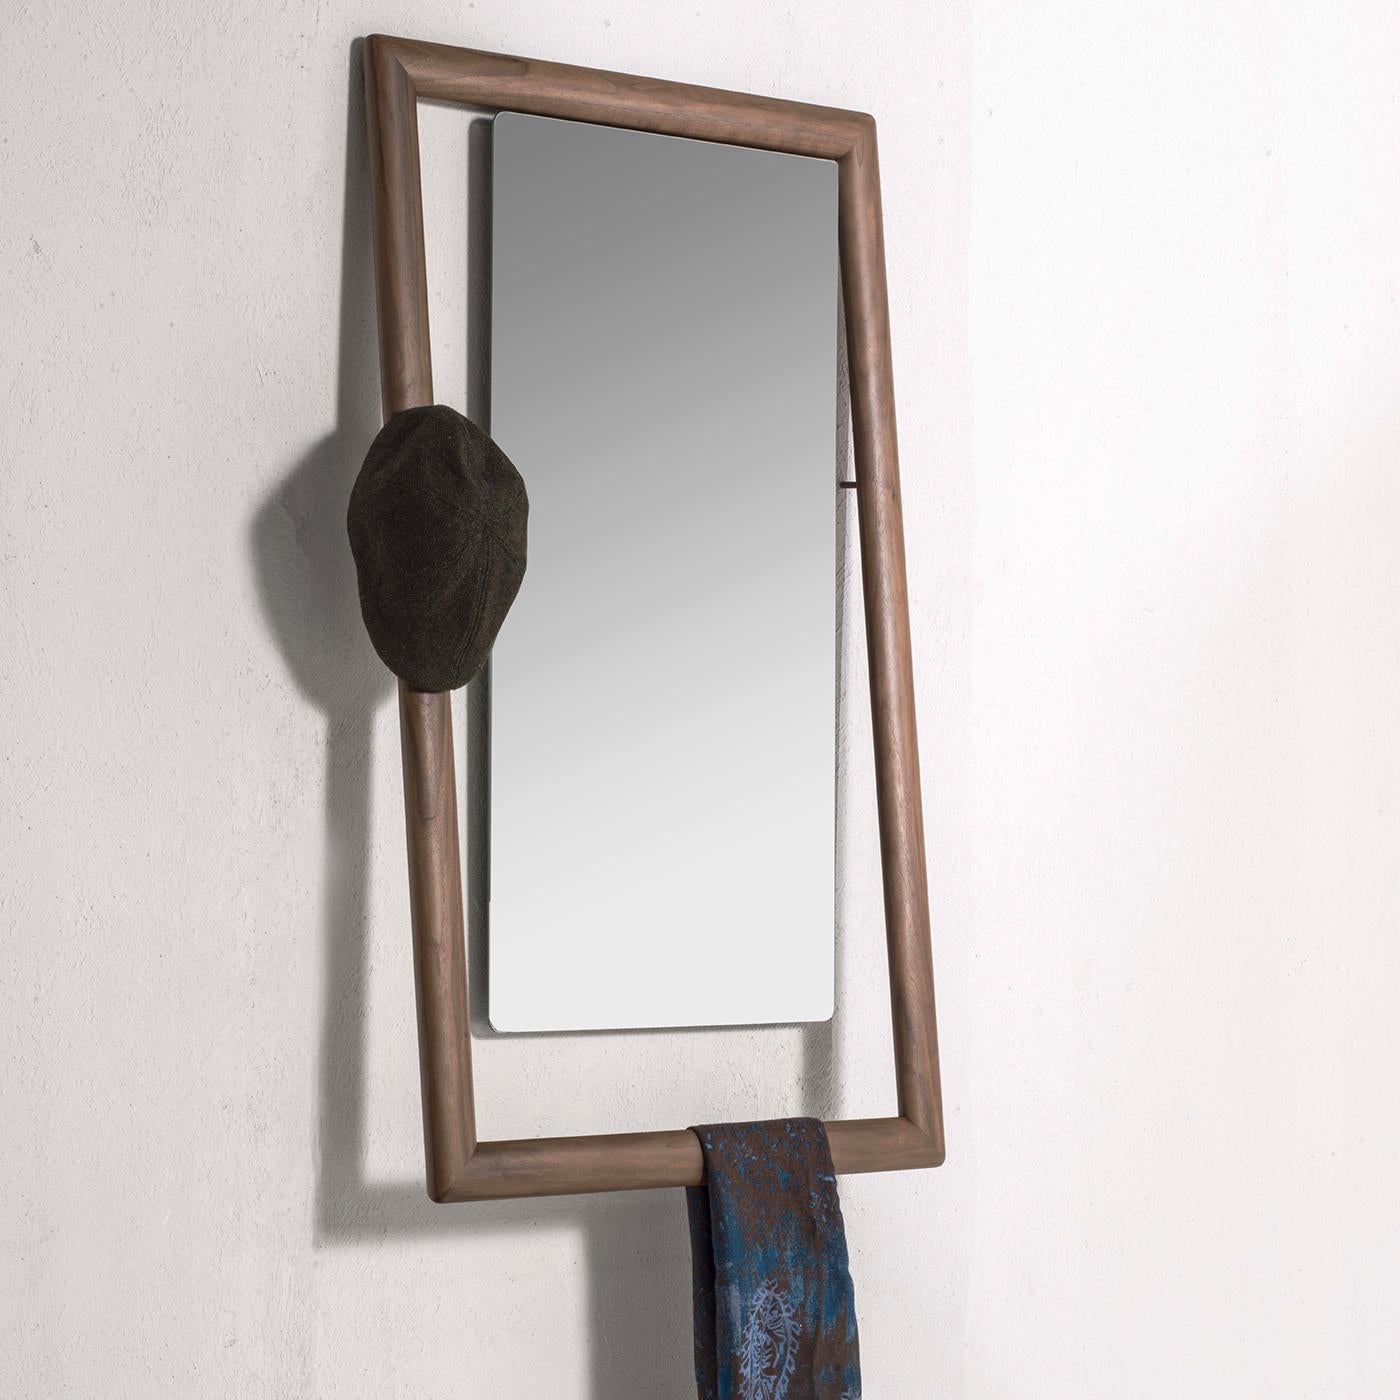 A truly multifunctional accessory, the Oblique mirror is suspended in a solid wood frame complete with a subtle oval shaped coat holder attached, providing a dual purpose of mirror and clothing valet providing added charm. The rounded knob is handy